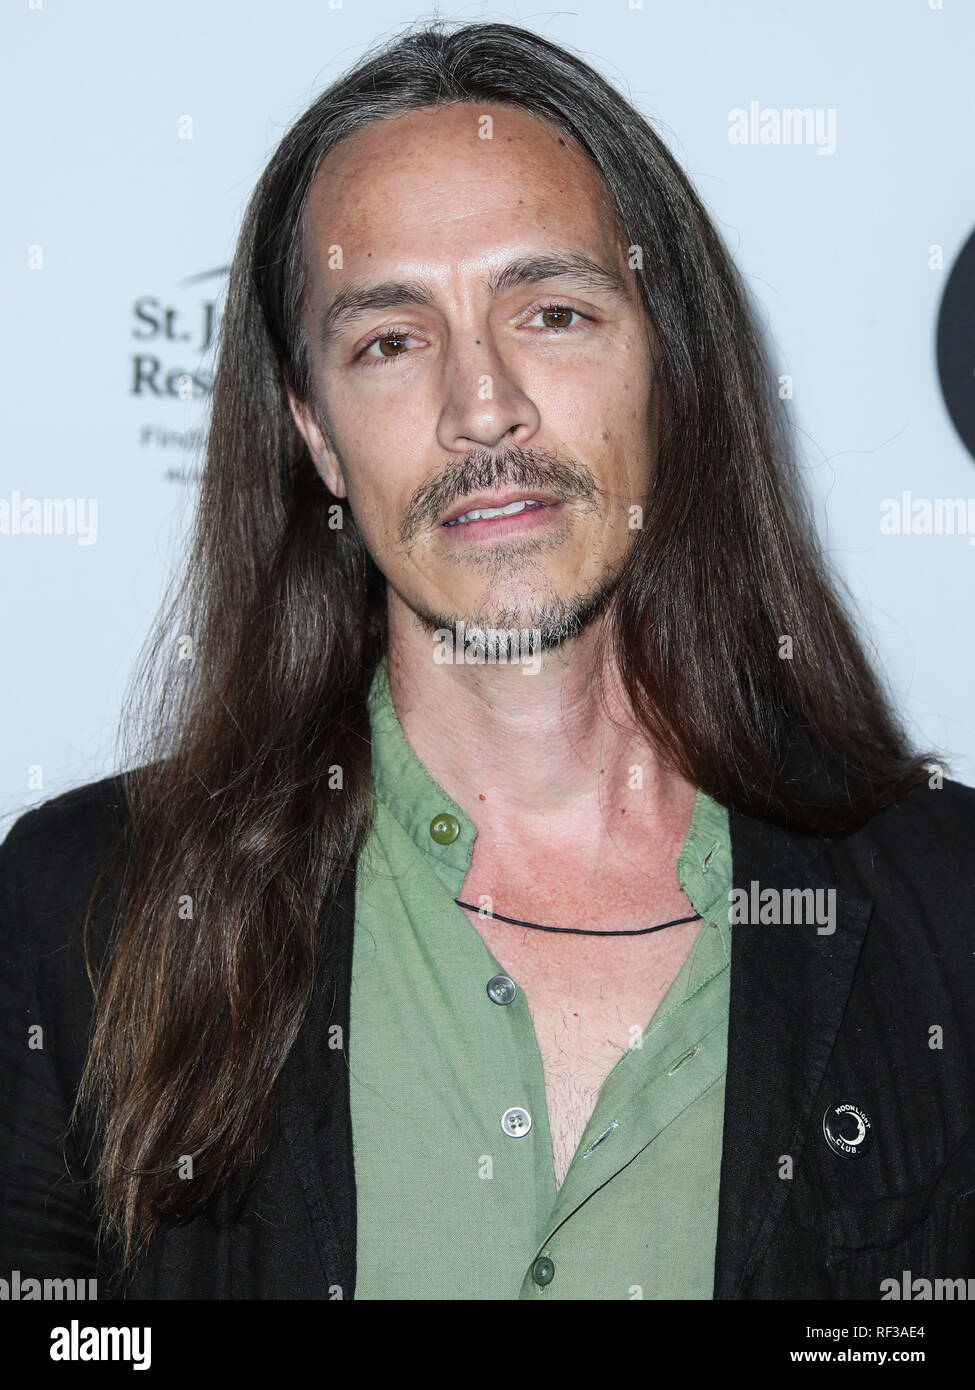 Los Angeles, California, USA. 23rd January, 2019. Singer Brandon Boyd of Incubus arrives at the Los Angeles Art Show 2019 Opening Night Gala held at the Los Angeles Convention Center on January 23, 2019 in Los Angeles, California, United States. (Photo by Xavier Collin/Image Press Agency) Credit: Image Press Agency/Alamy Live News Stock Photo